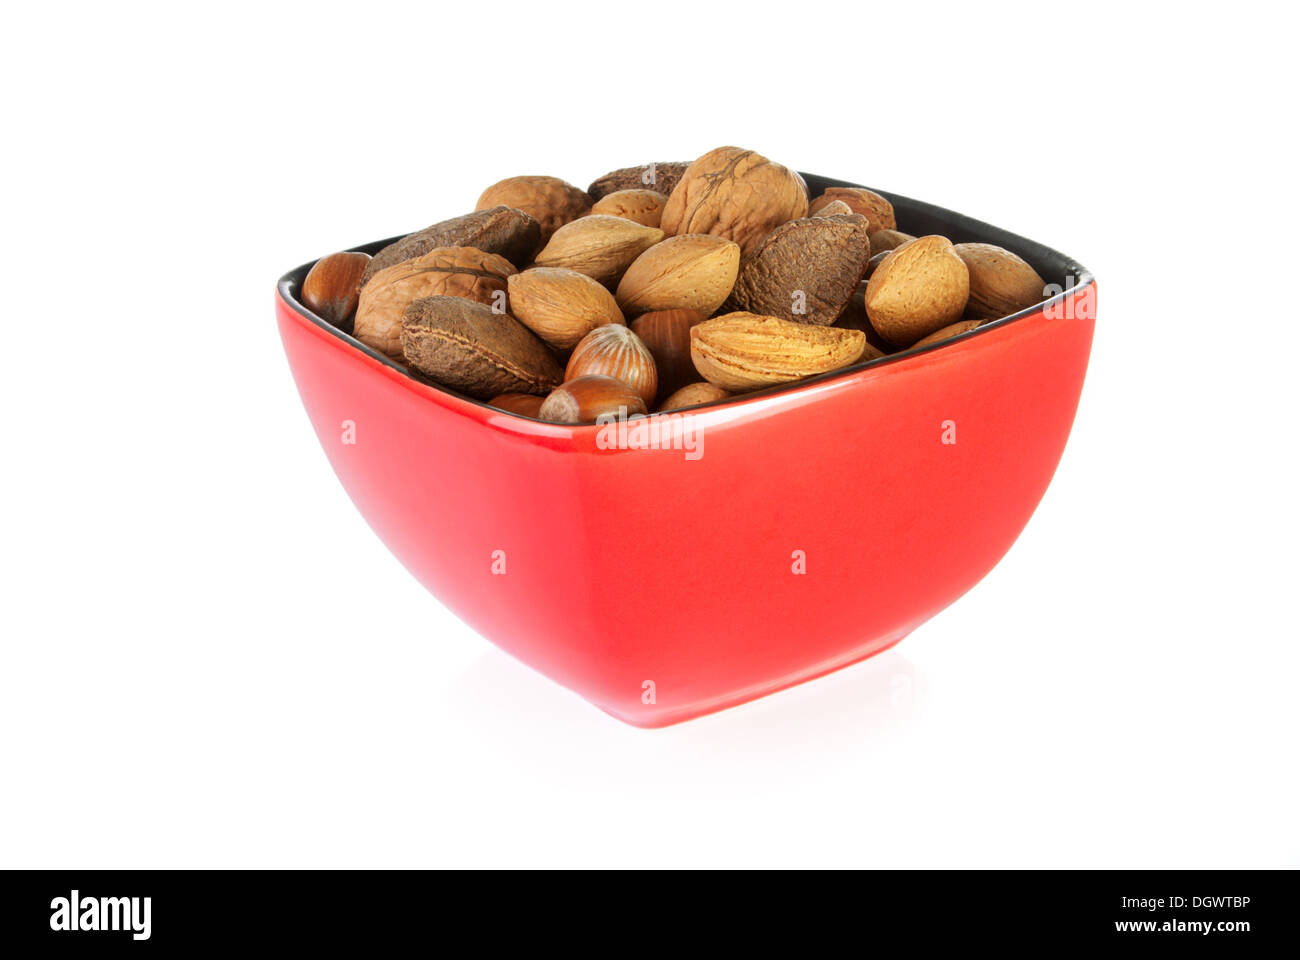 Bowl of mixed nuts containing almonds, hazelnuts, walnuts and Brazil nuts on a white background Stock Photo